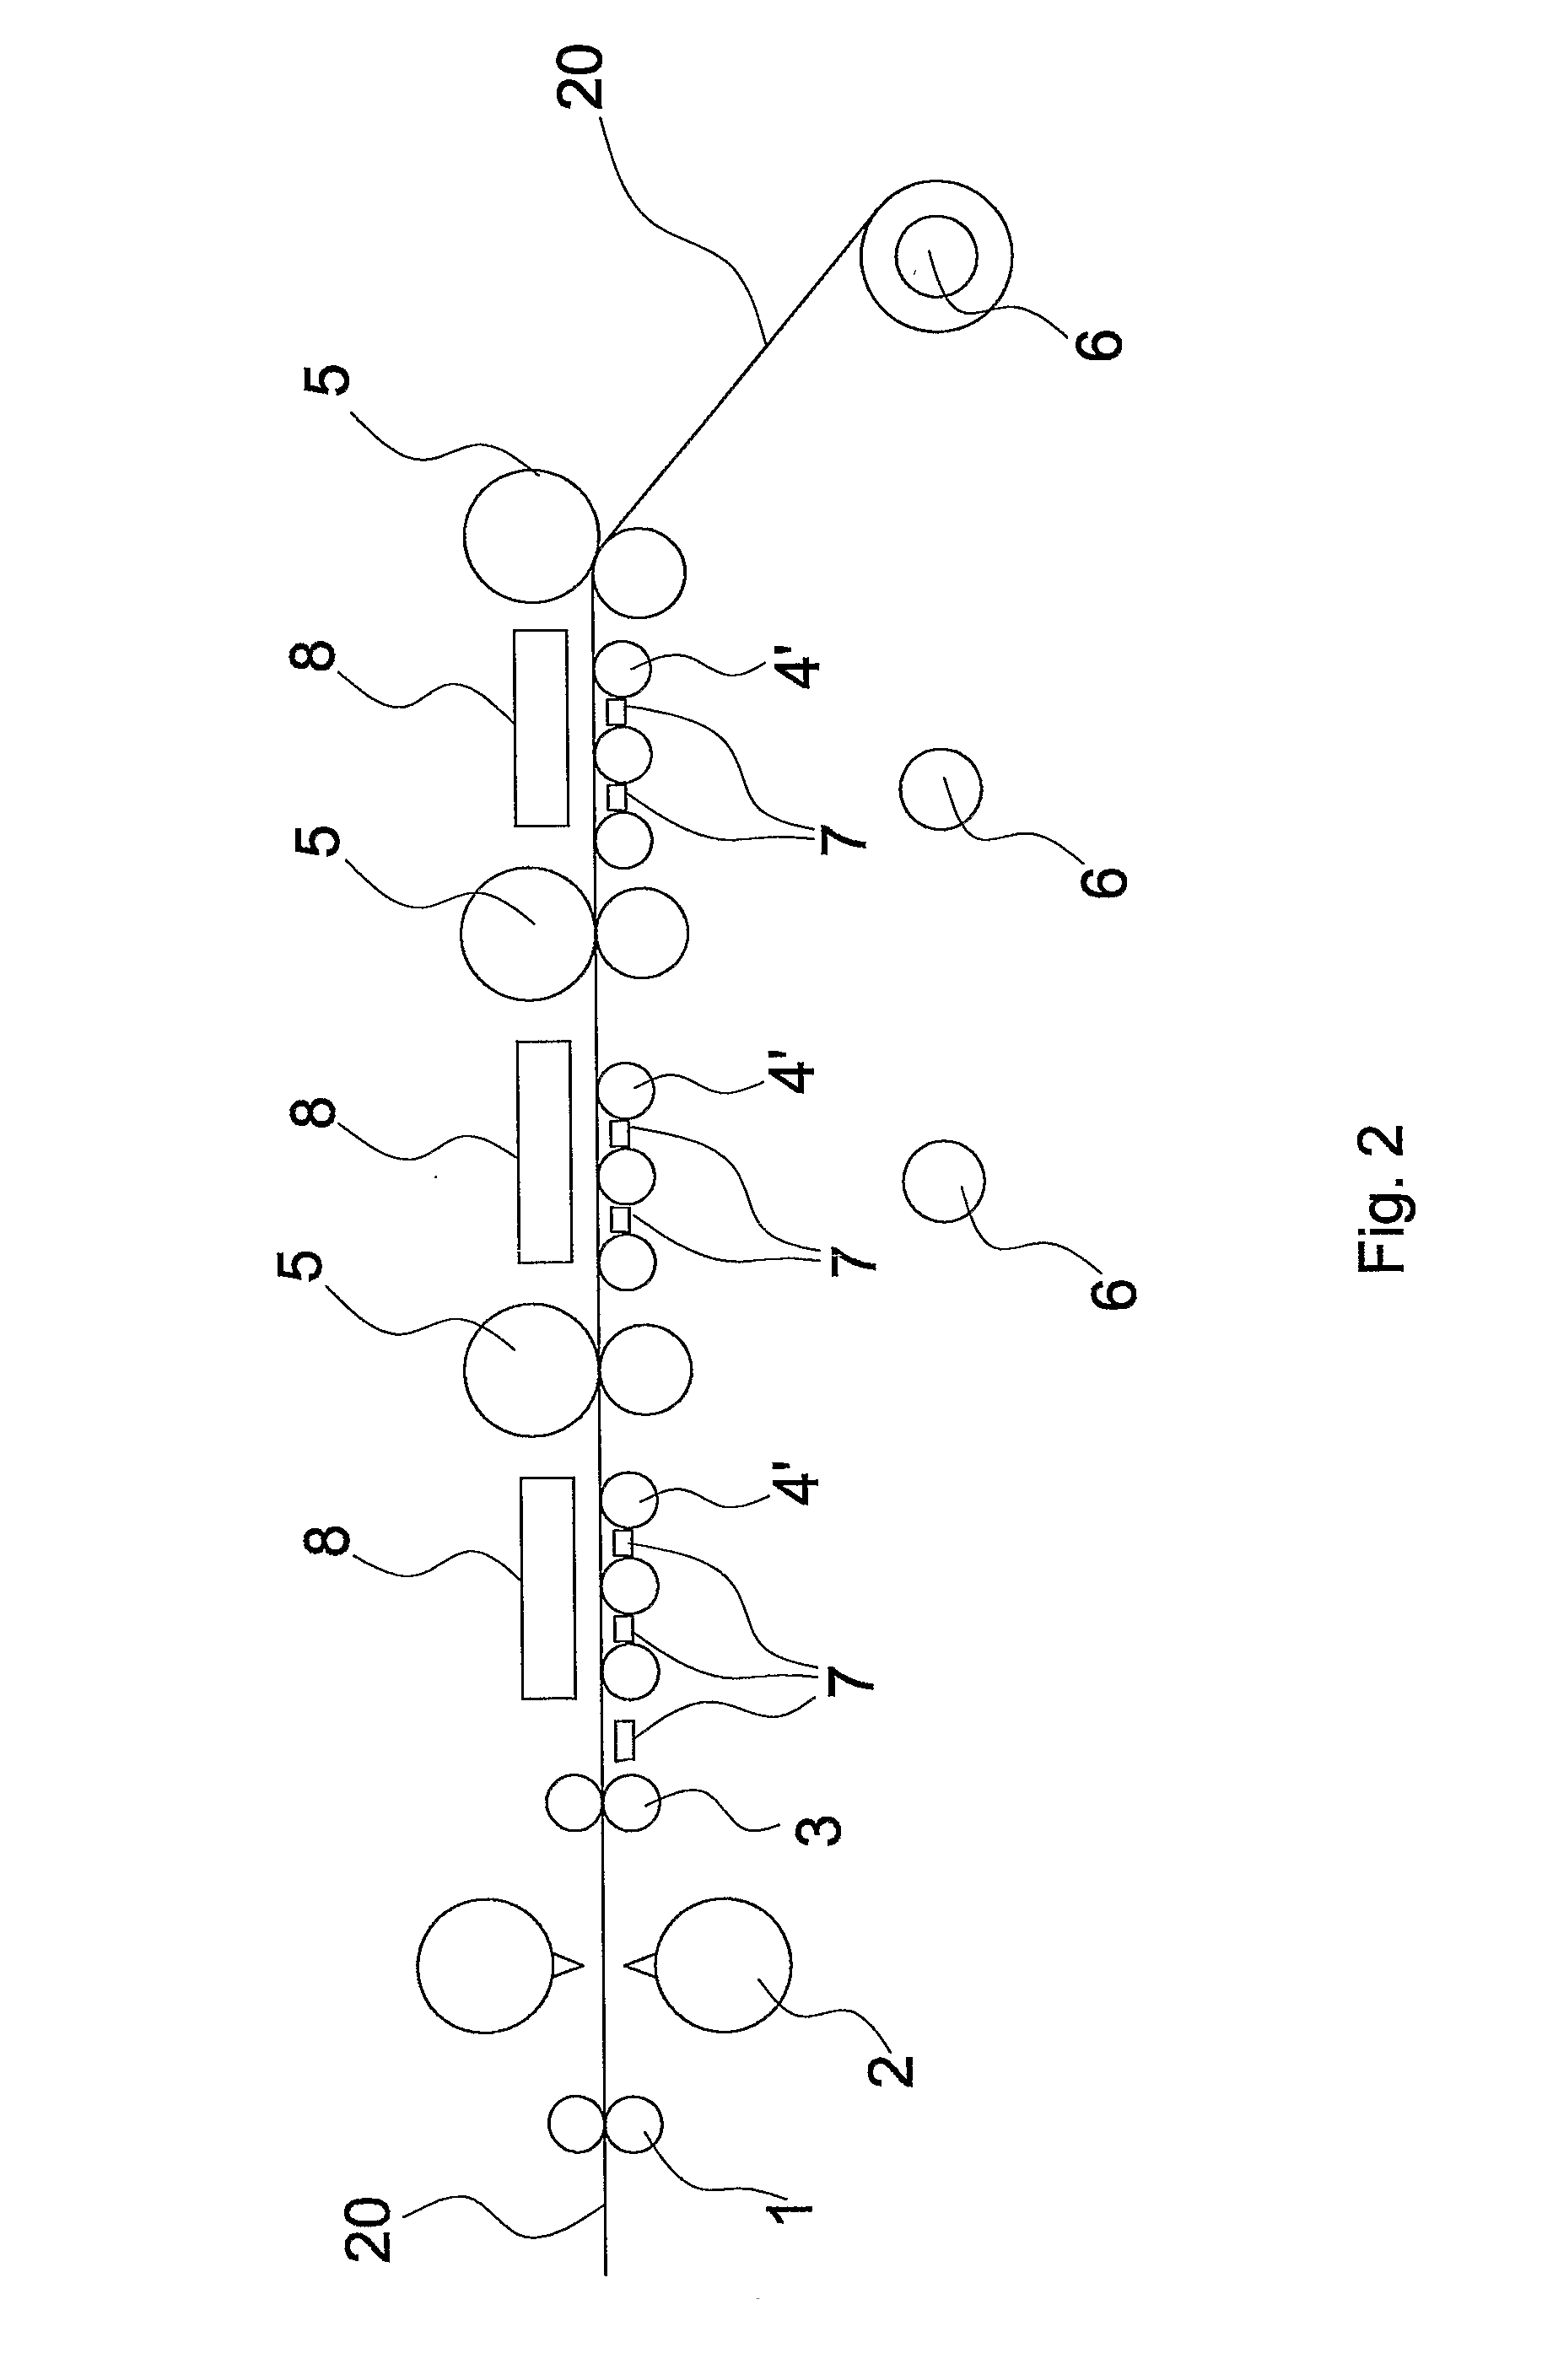 Guiding system for a metal strip at a rolling mill outlet